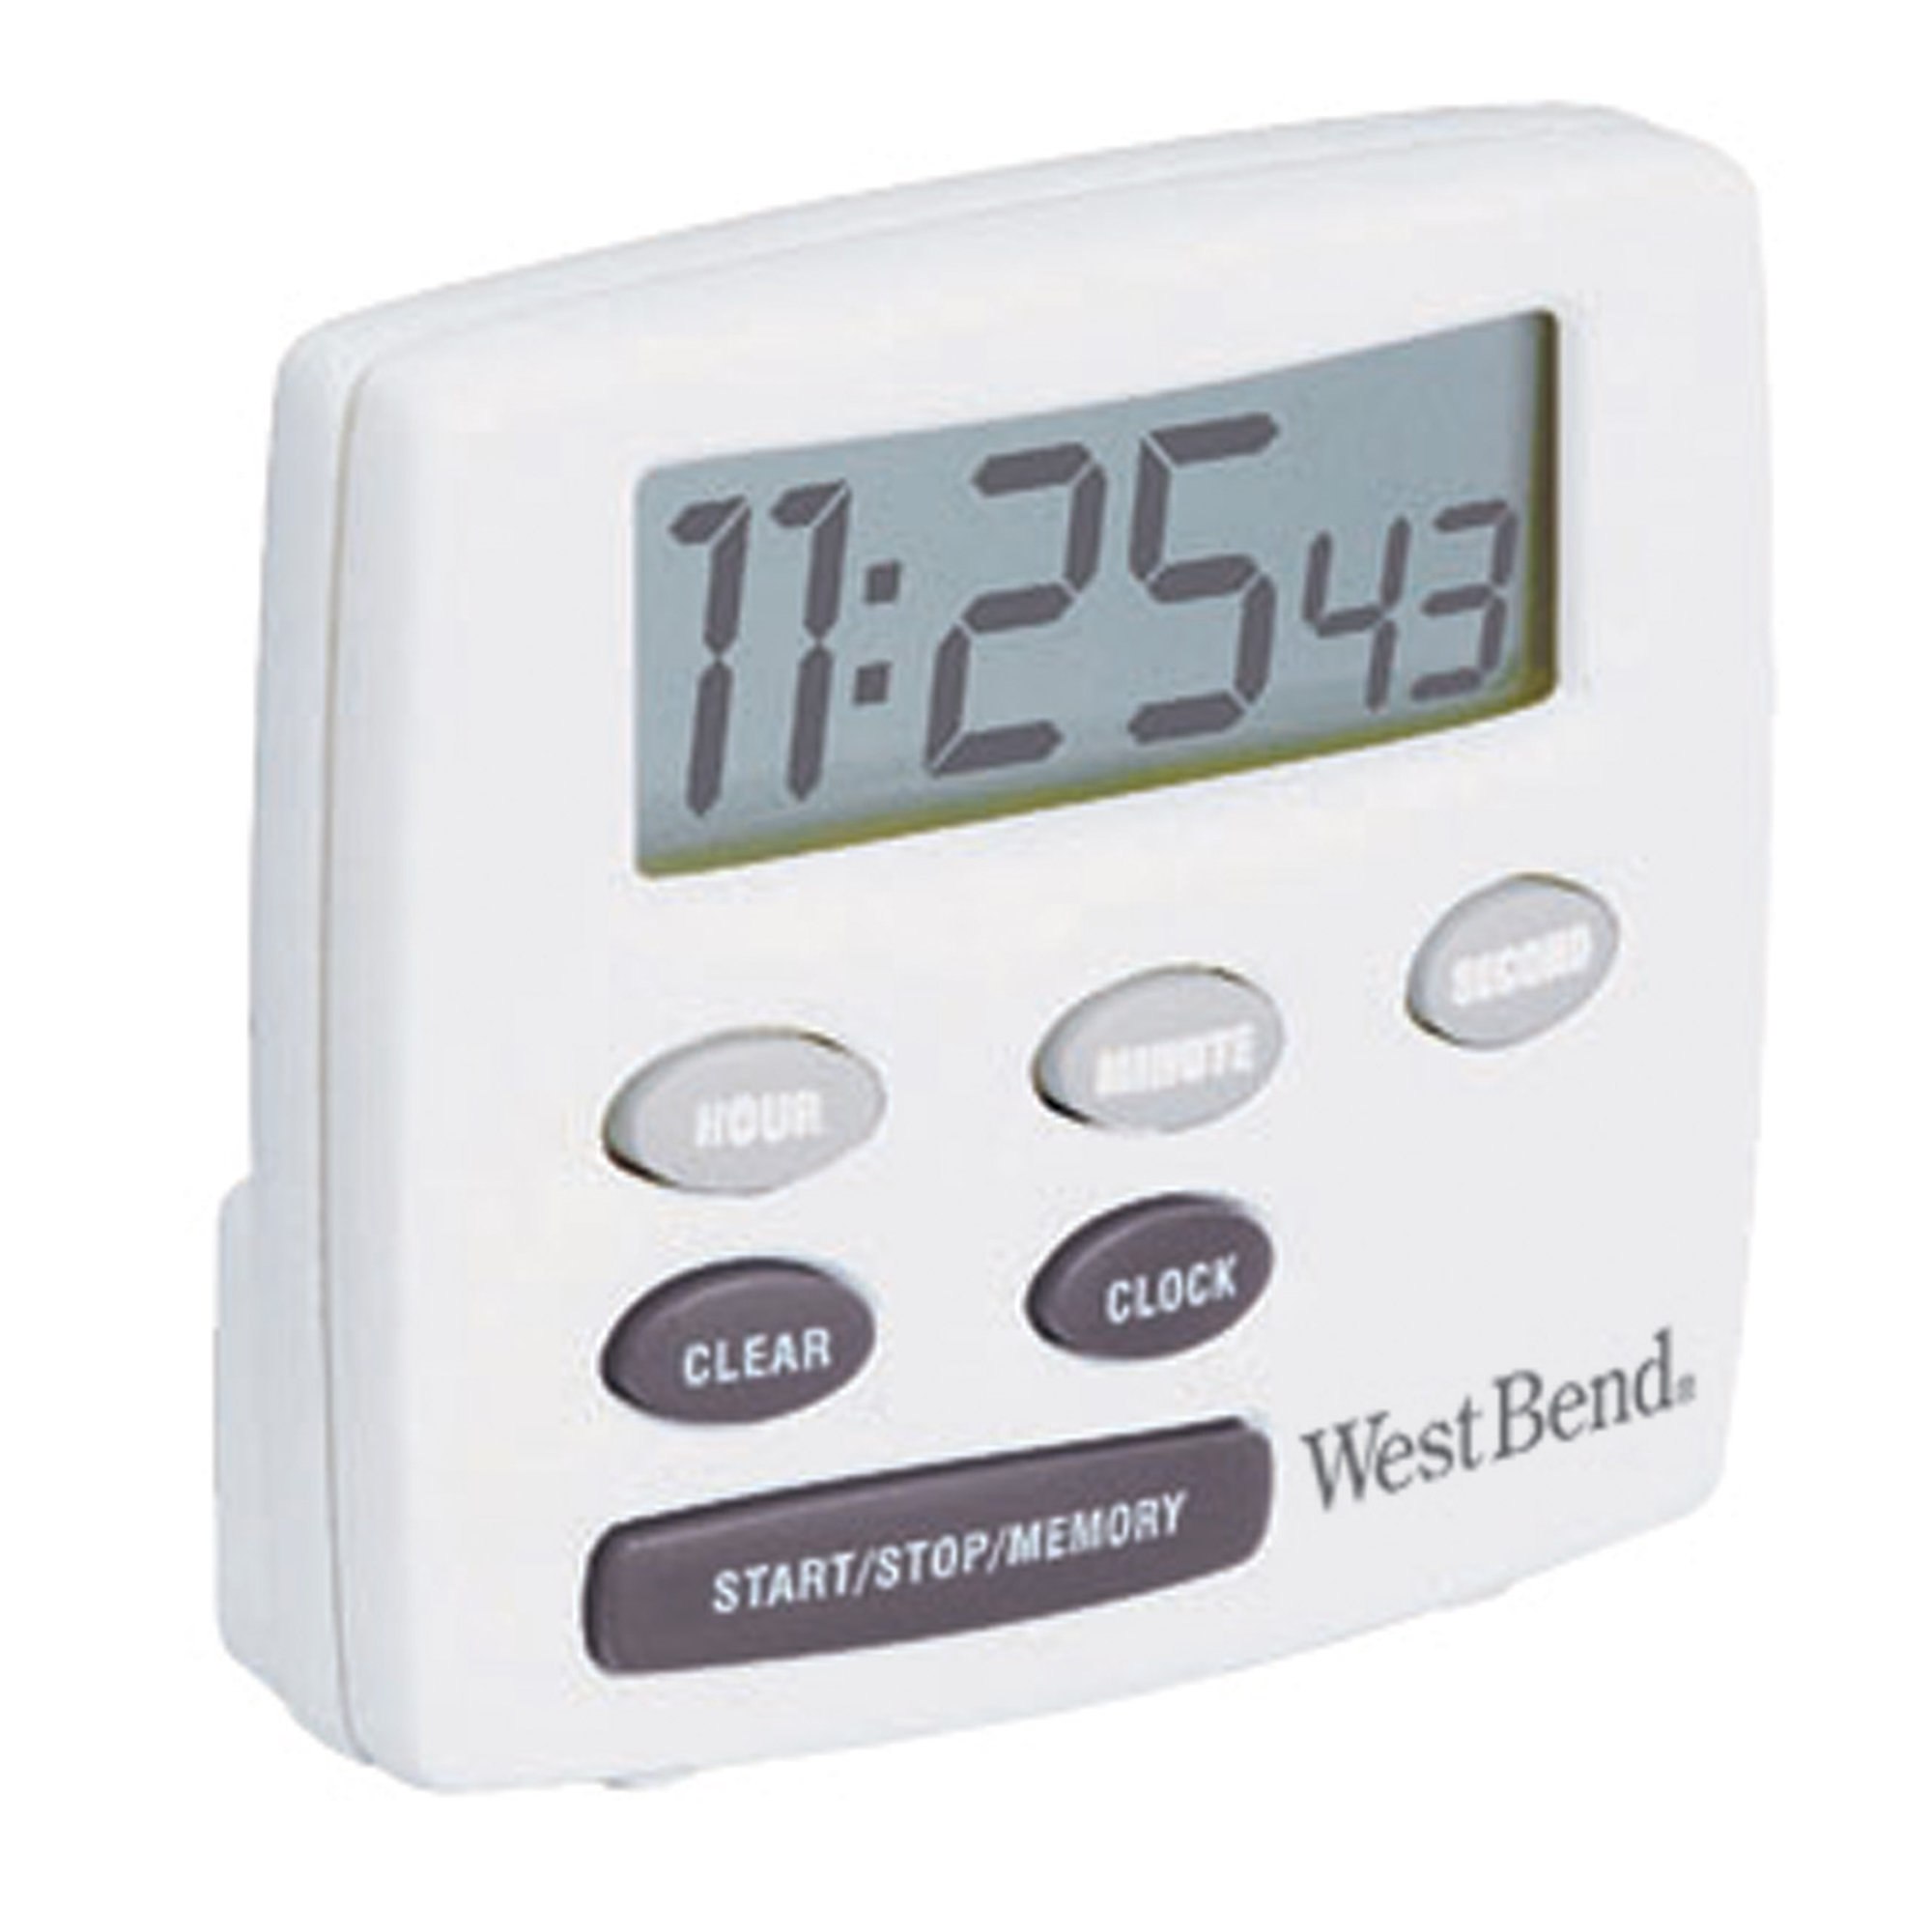 West Bend Single Channel Timer, Time Setting Memory